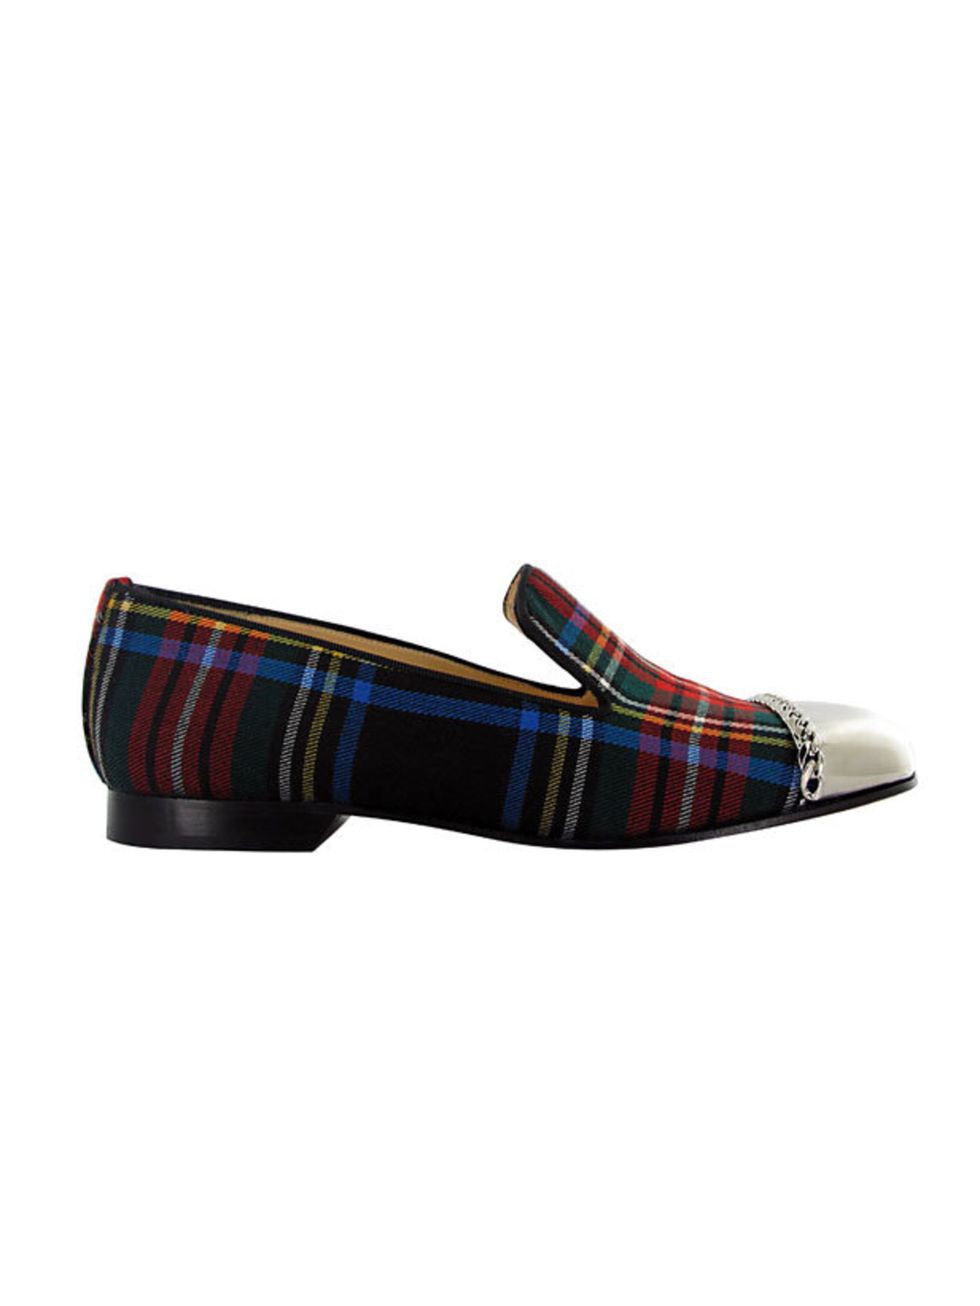 <p>Christian Louboutin tartan loafers, £635, for stockists call 0207491 0033</p>